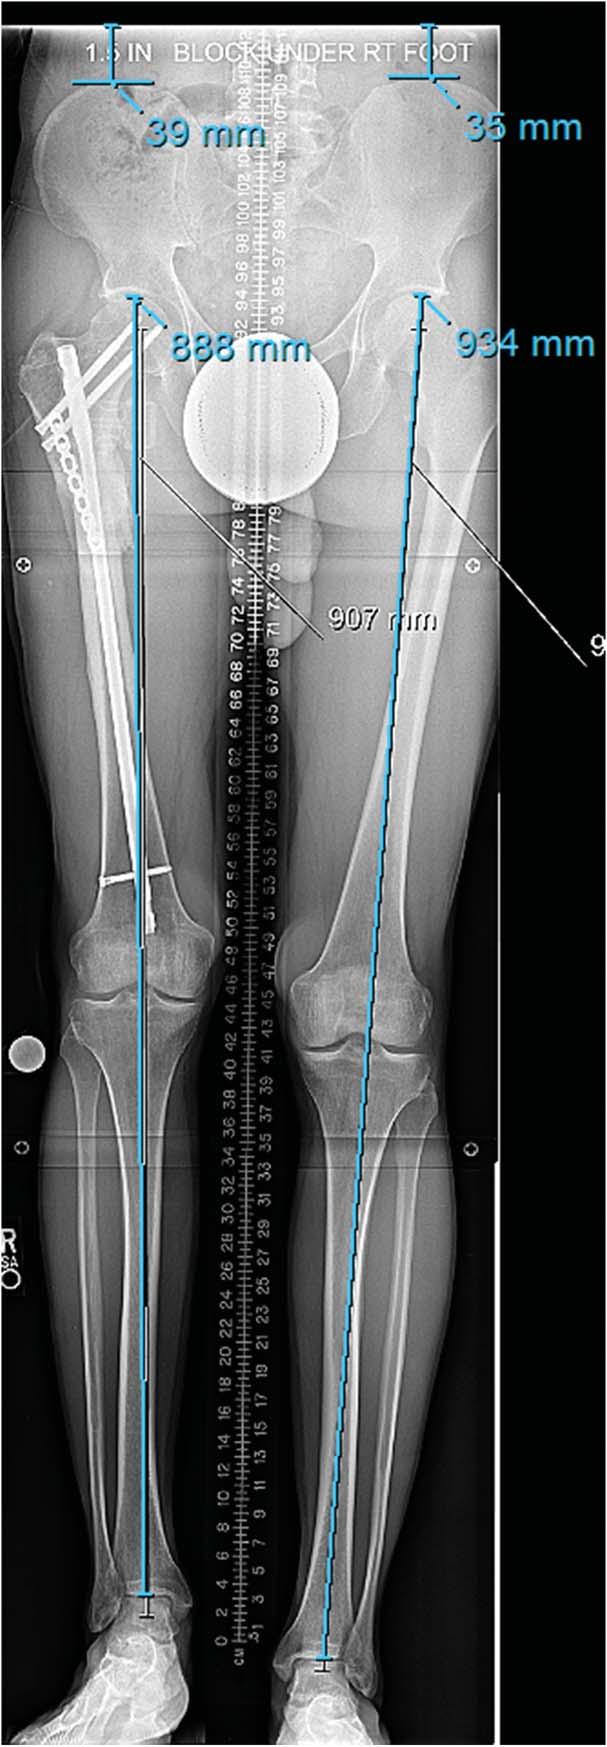 Fragomen J Orthop Trauma Volume 31, Number 6 Supplement, June 2017 FIGURE 7. A long, standing, bipedal 5100 radiograph showed a 40 46 mm limb length discrepancy with the right side shorter.